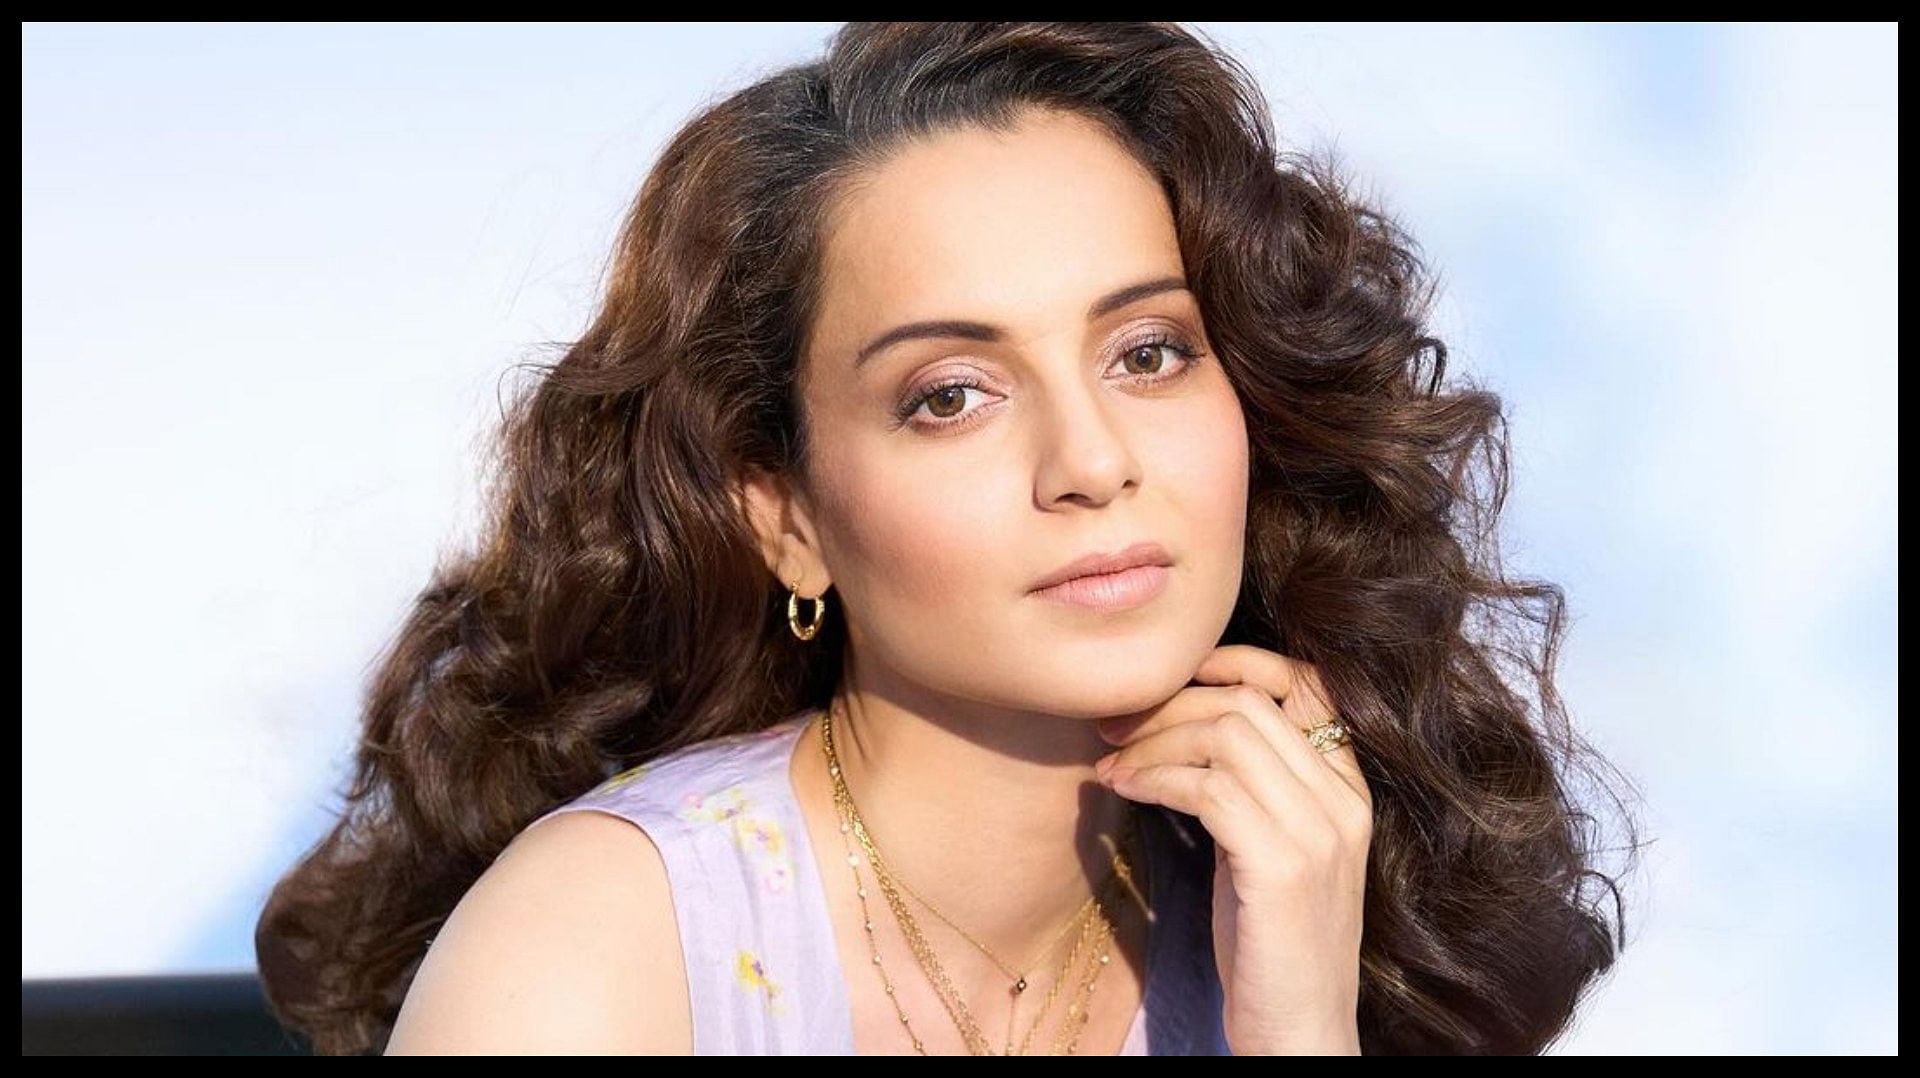 Bjp mp kangana ranaut shared the video and told why the CISF constable slapped her at Chandigarh airport